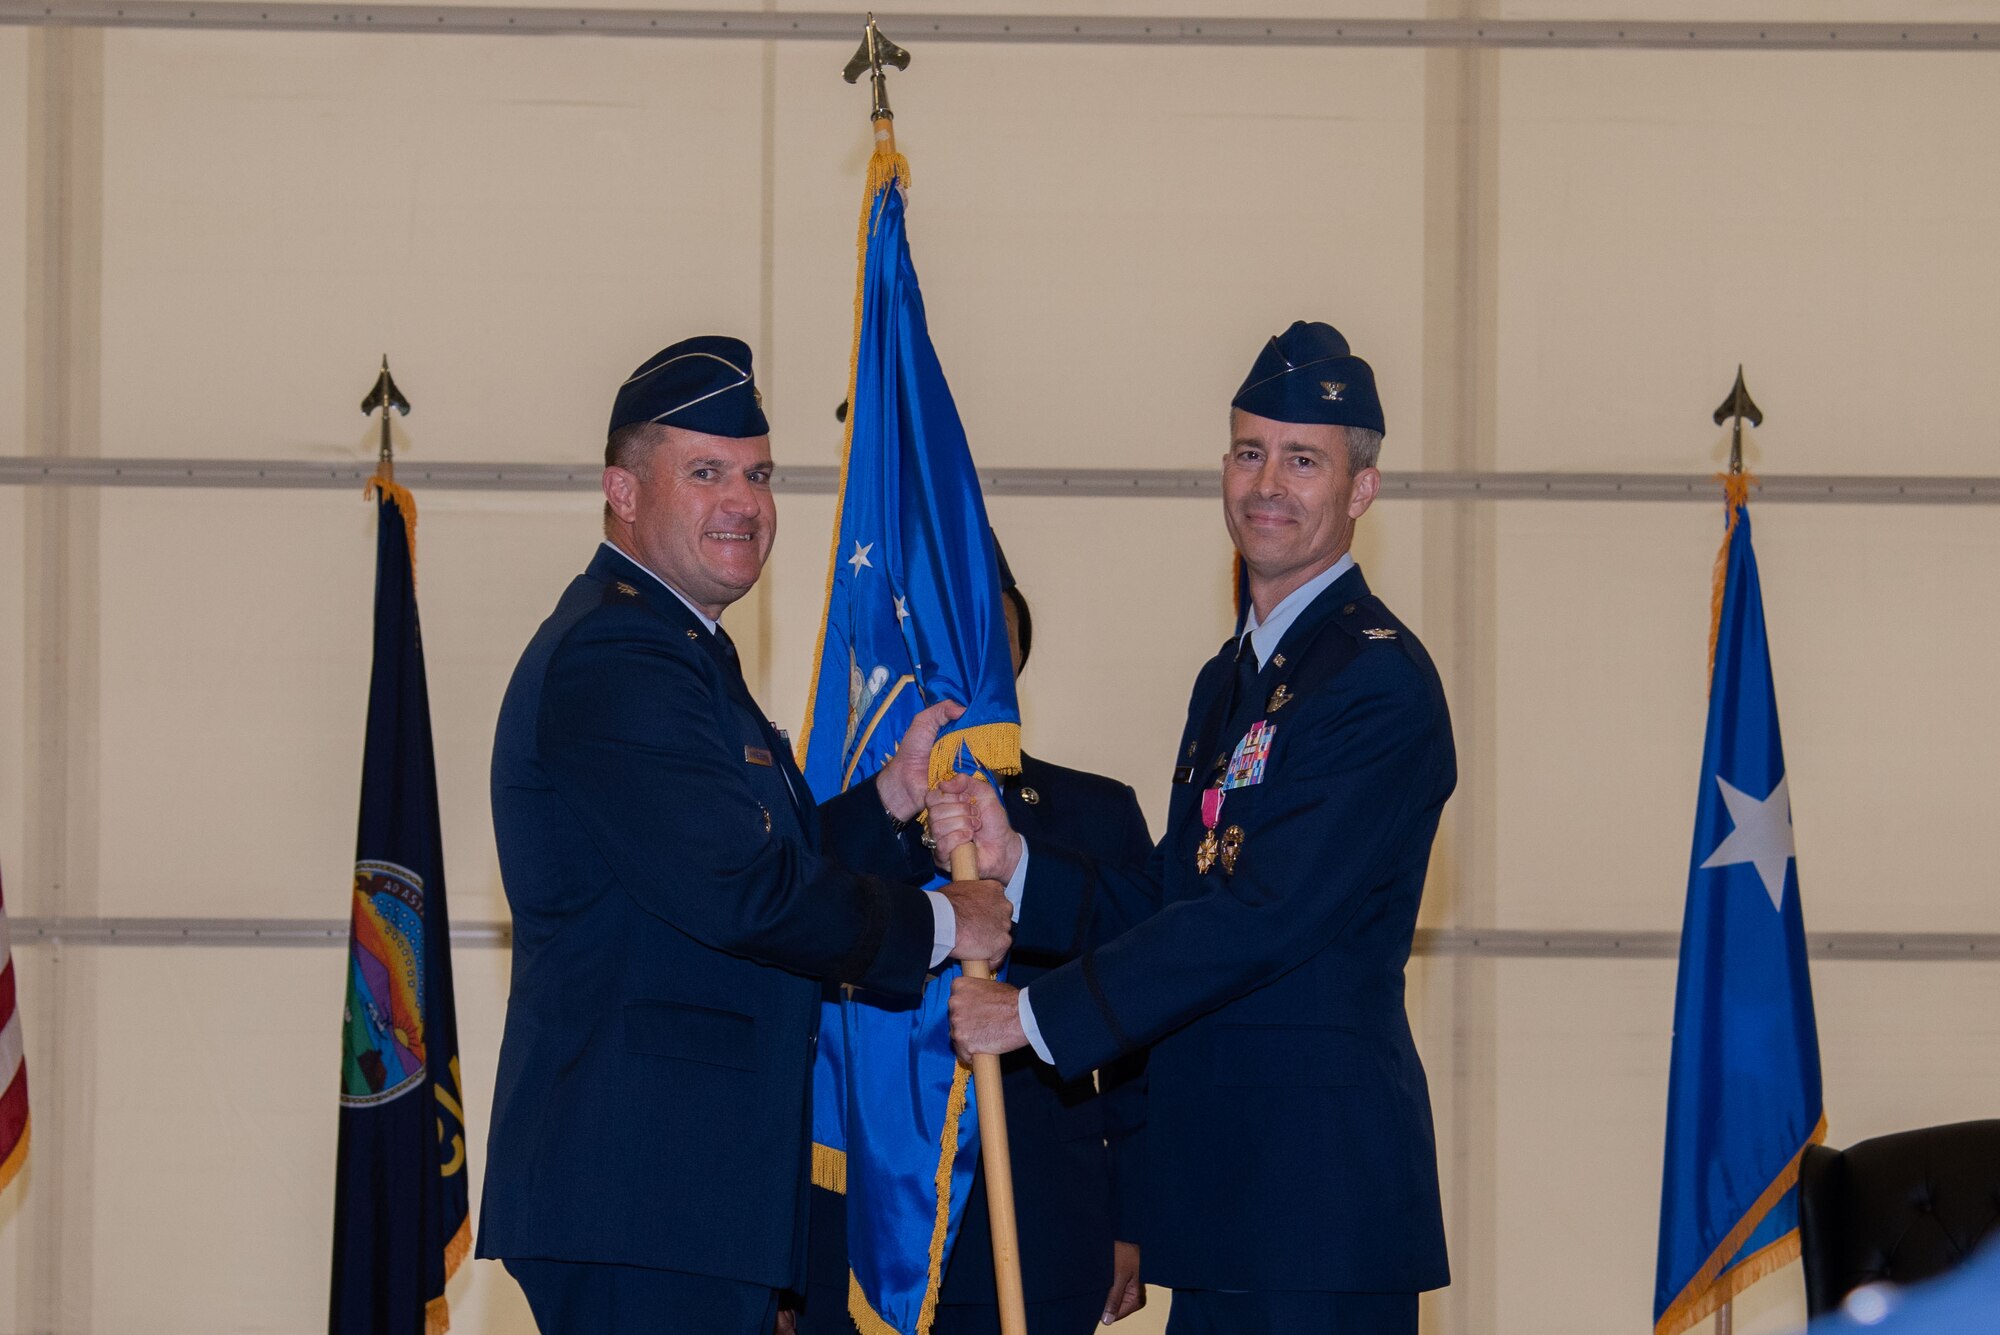 Maj. Gen. Kenneth Bibb, 18th Air Force commander, presents the ceremonial guidon to Col. Richard Tanner, 22nd Air Refueling Wing outbound commander, June 28, 2021, at McConnell Air Force Base, Kansas. This act marks the official end of Tanner’s tenure as commander of the 22nd ARW. (U.S. Air Force Photo by Airman 1st Class Zachary Willis)